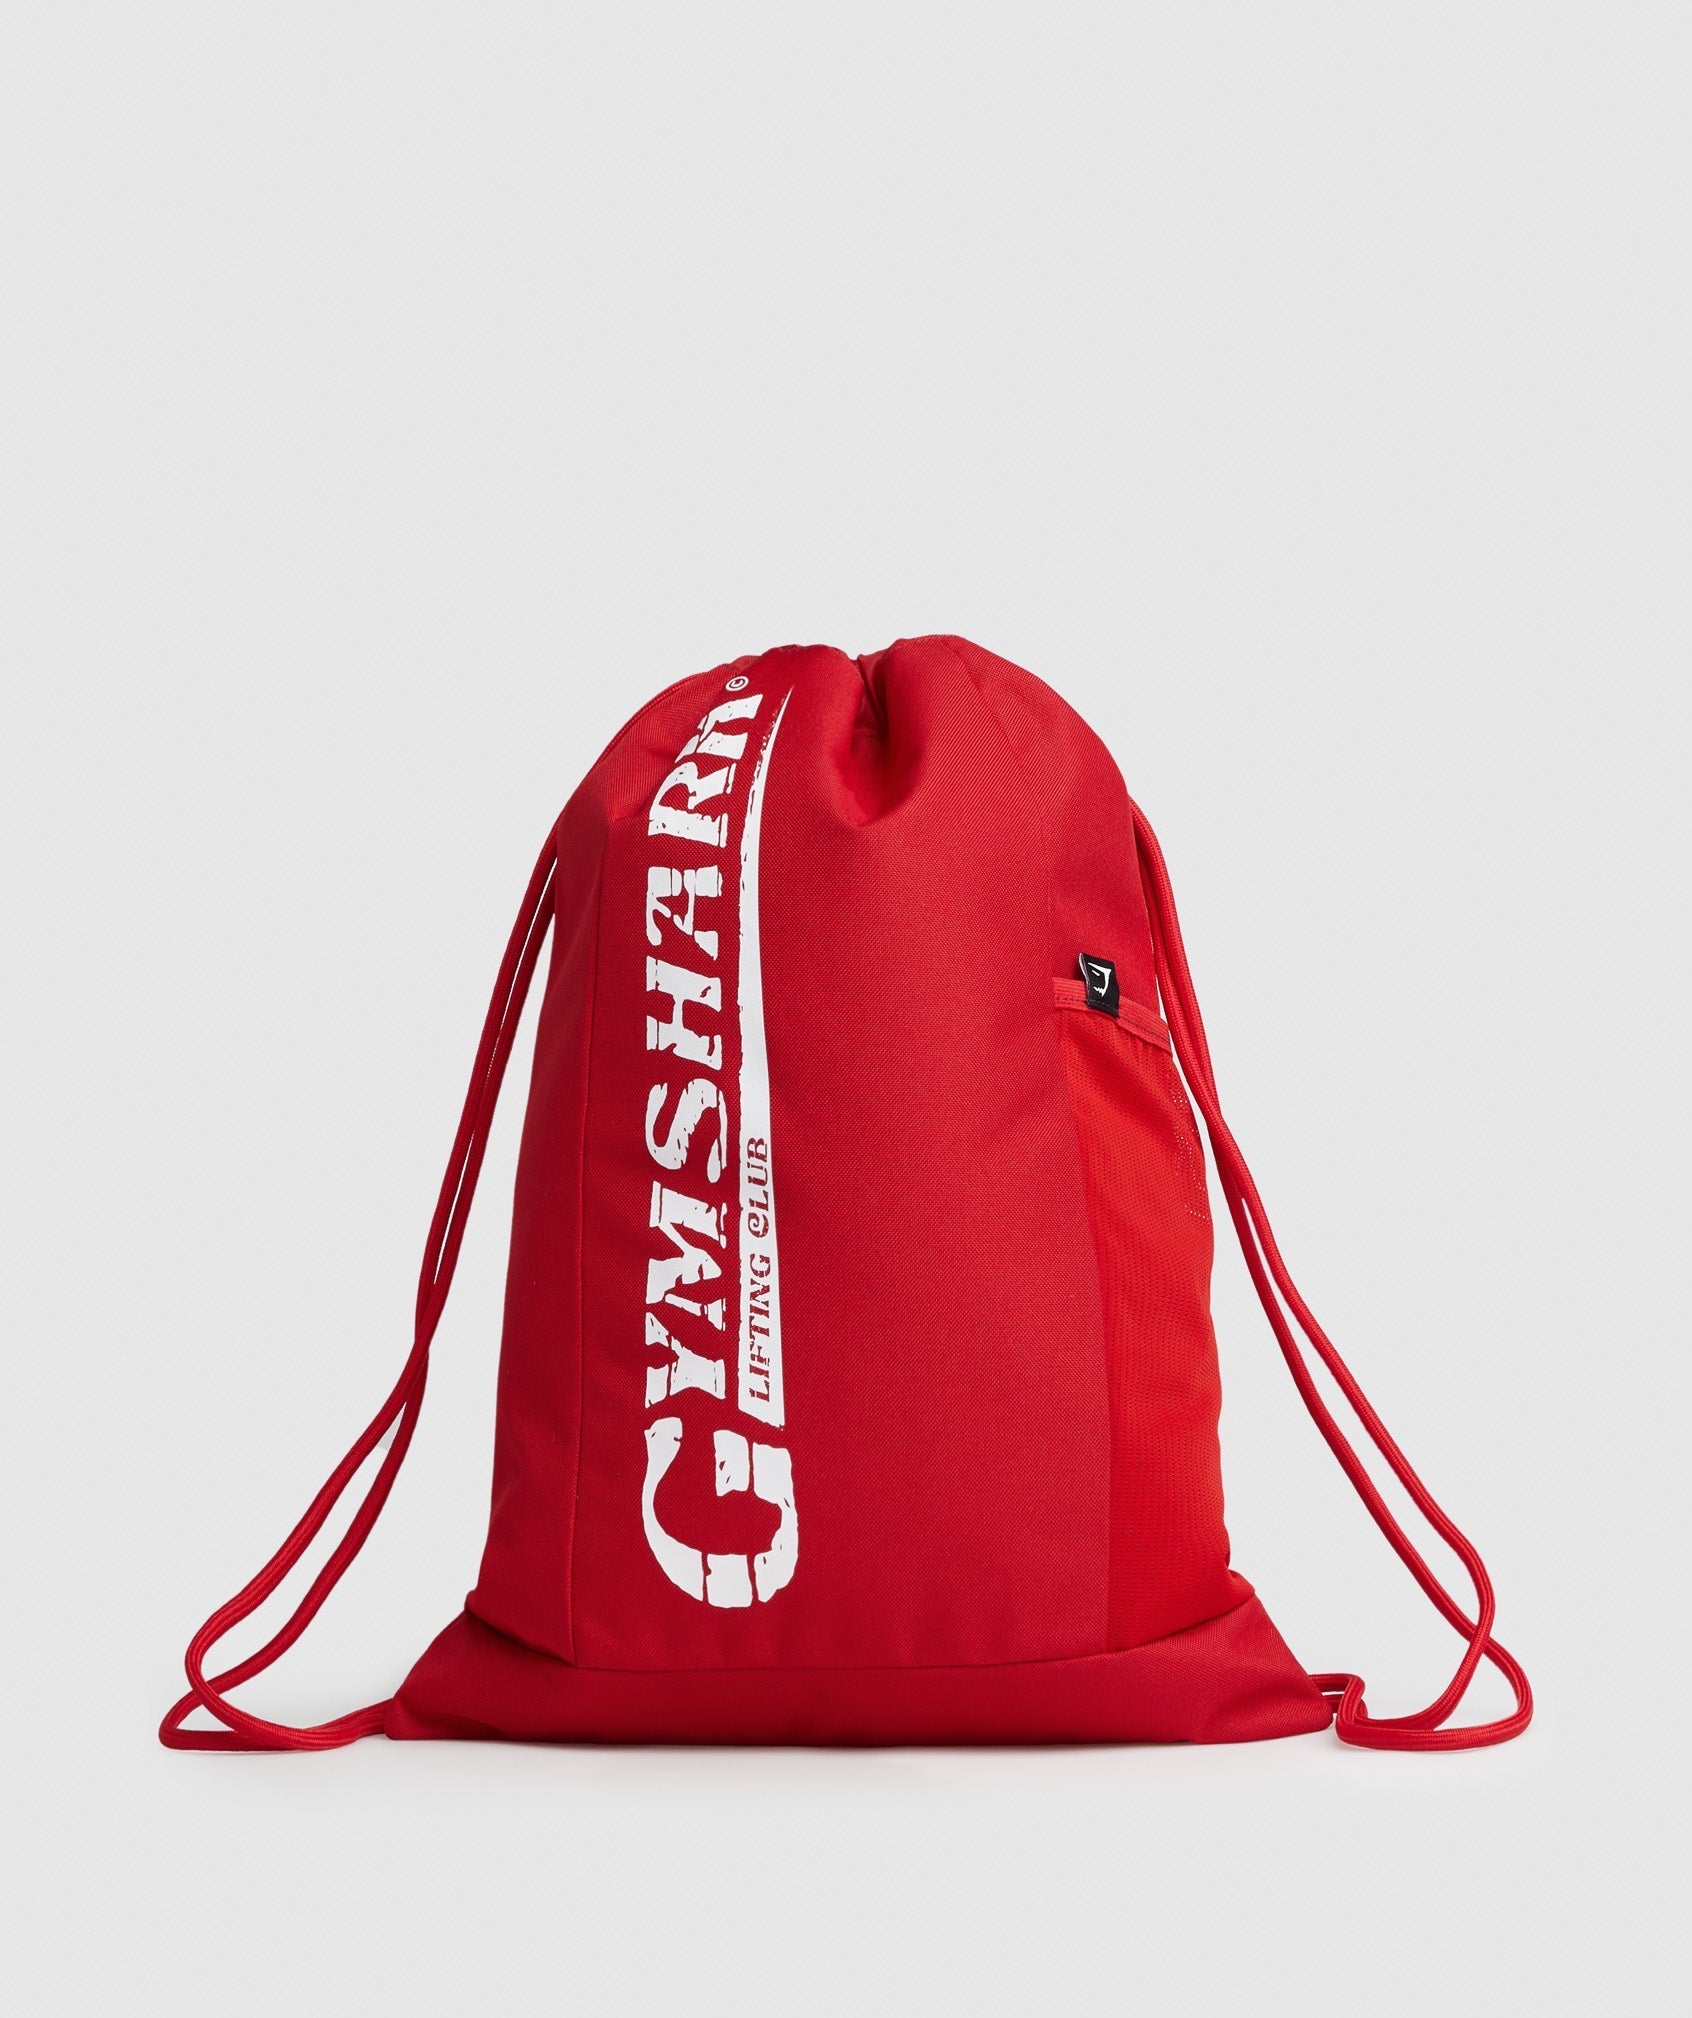 GFX Sharkhead Gymsack in Carmine Red - view 1